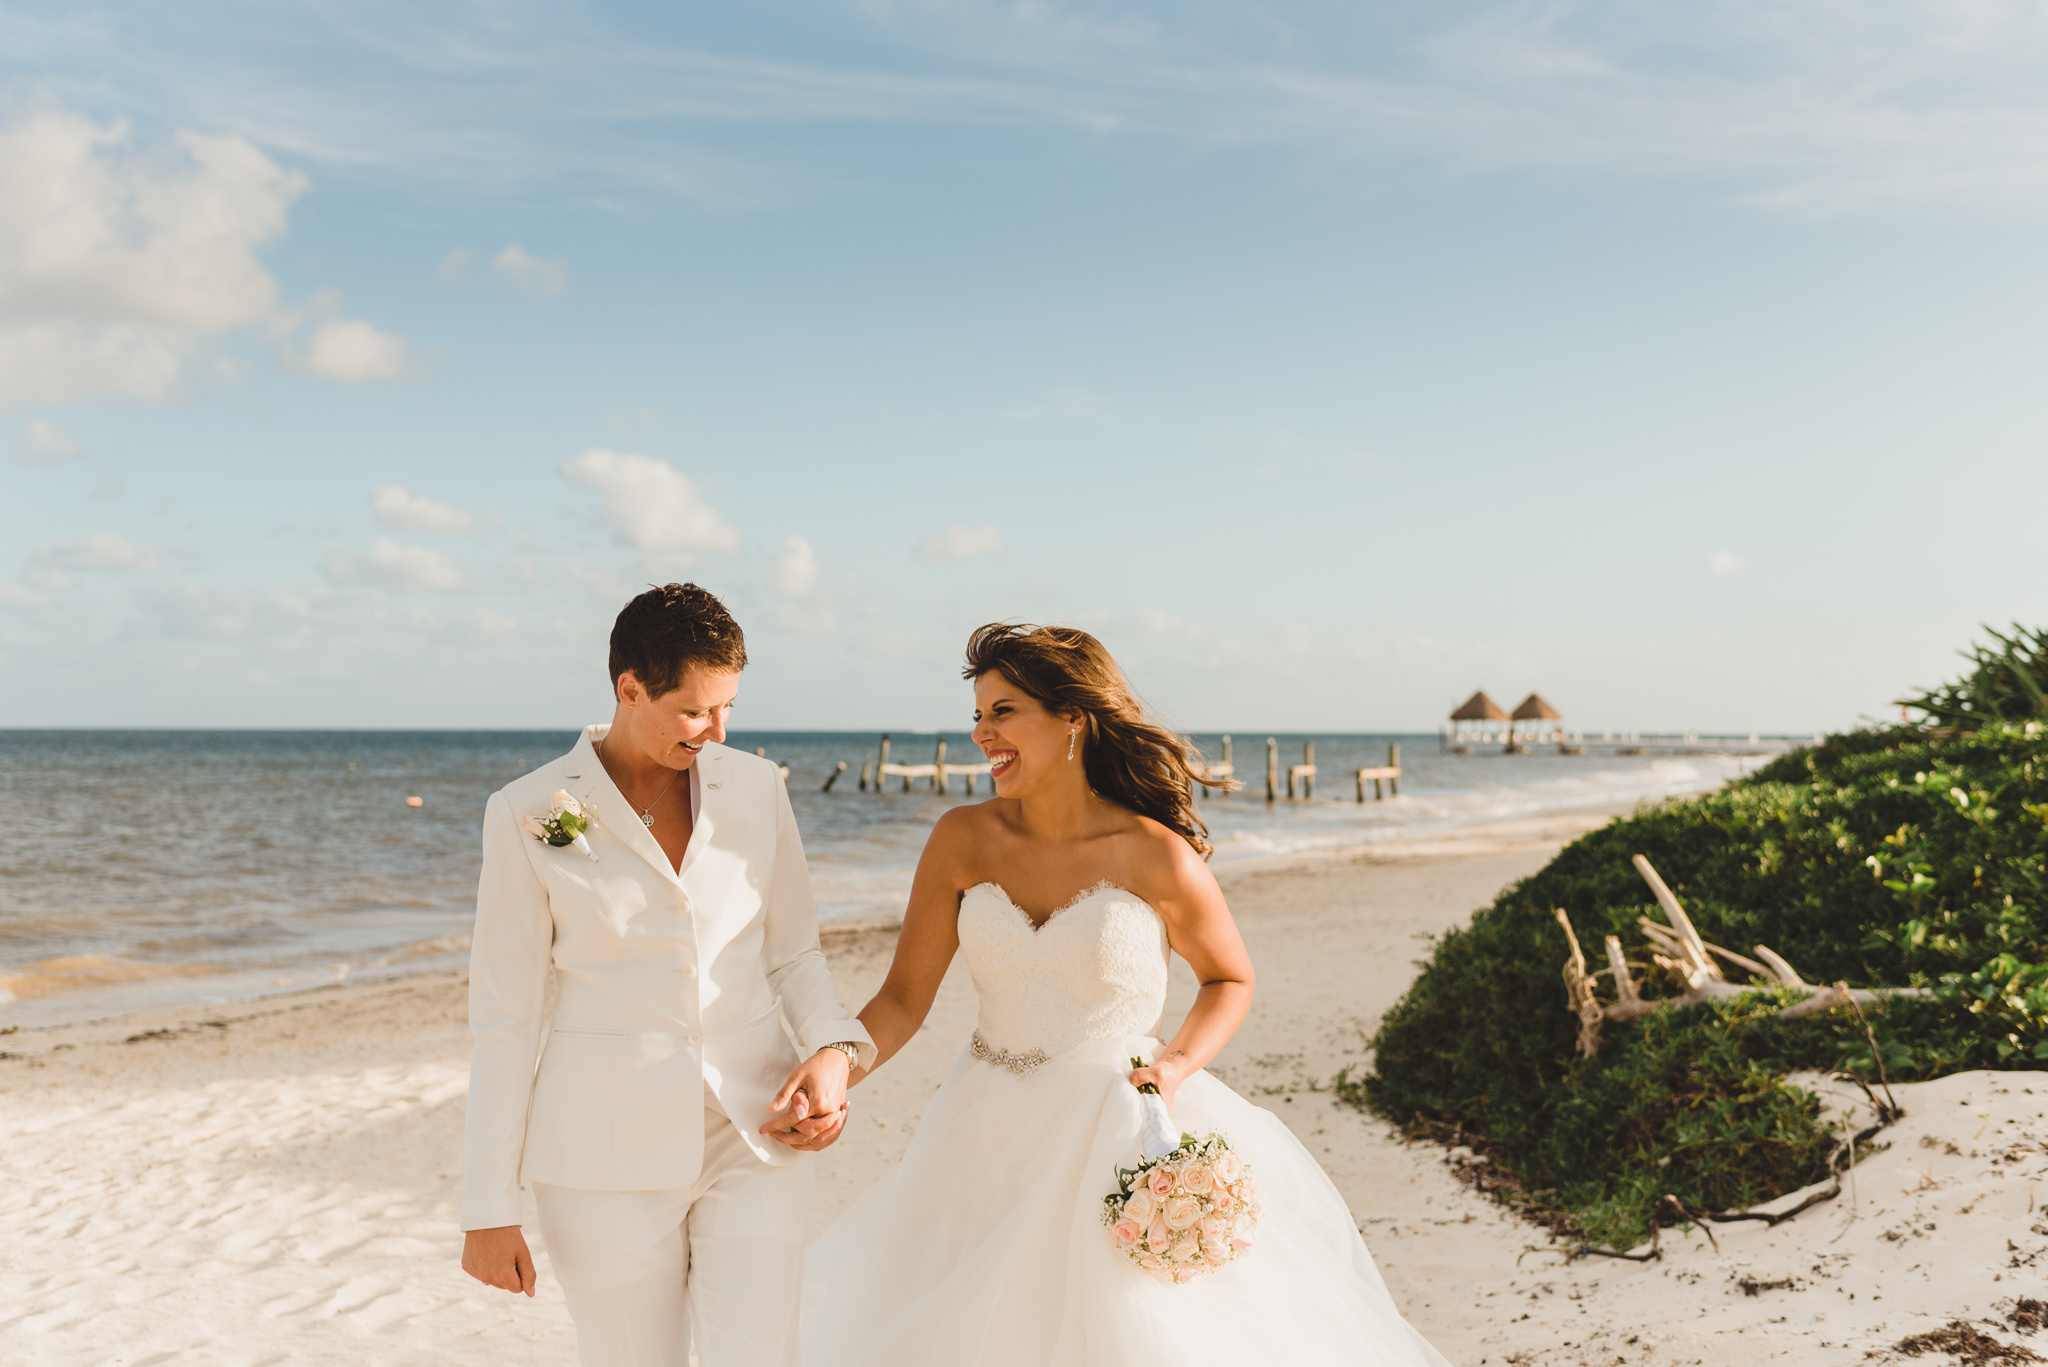 brides walking along beach holding hands after ceremony at Now Sapphire Resort in Mexico